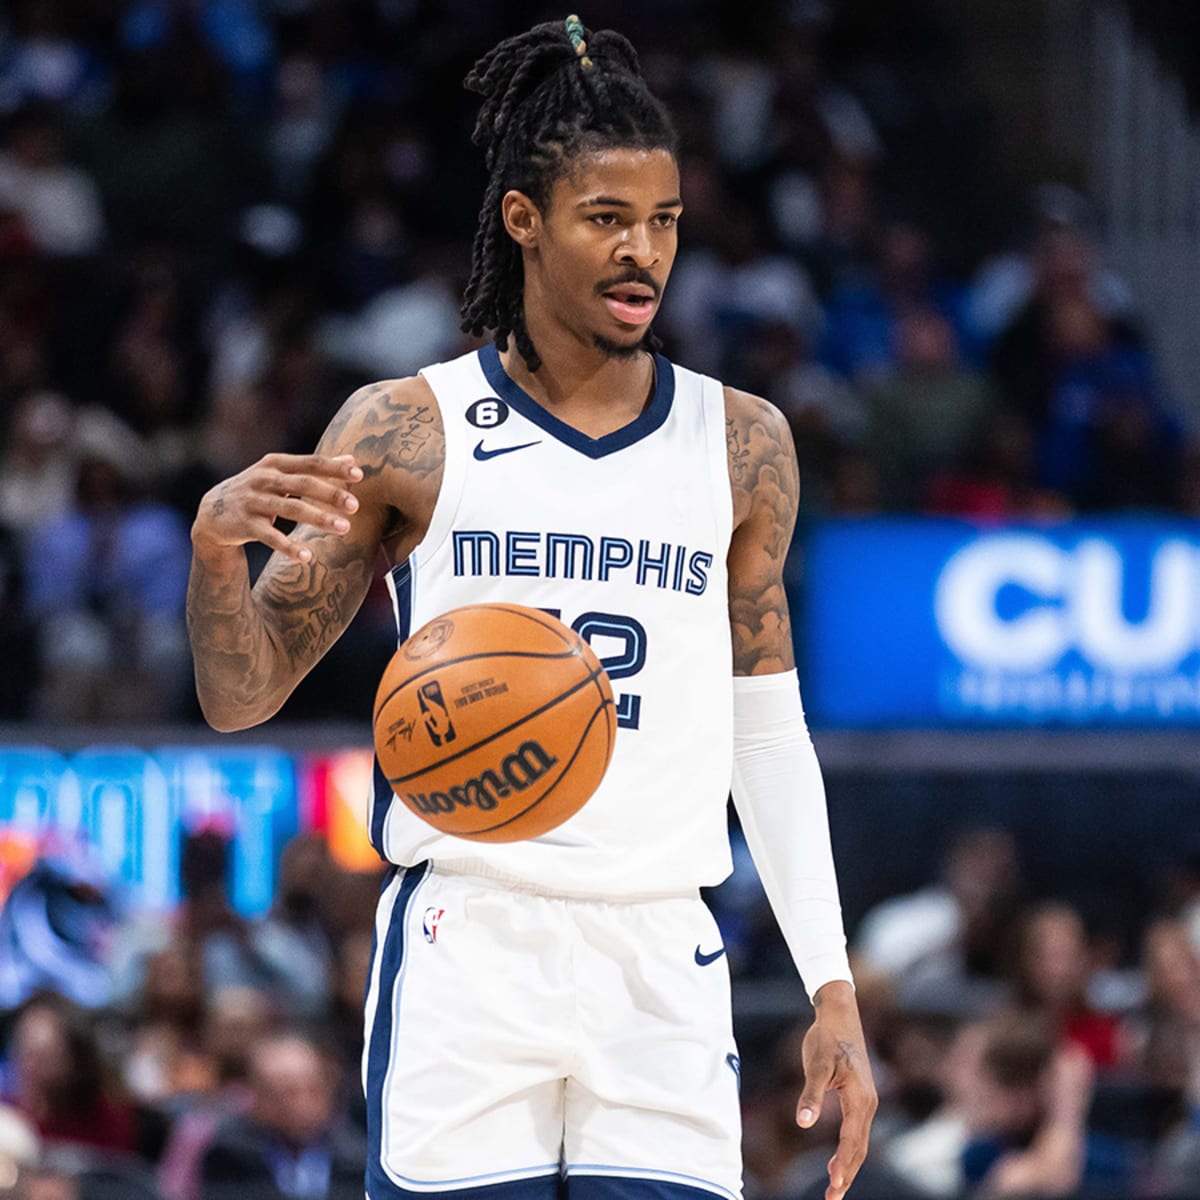 NBA will allow Ja Morant to travel, practice with Grizzlies during